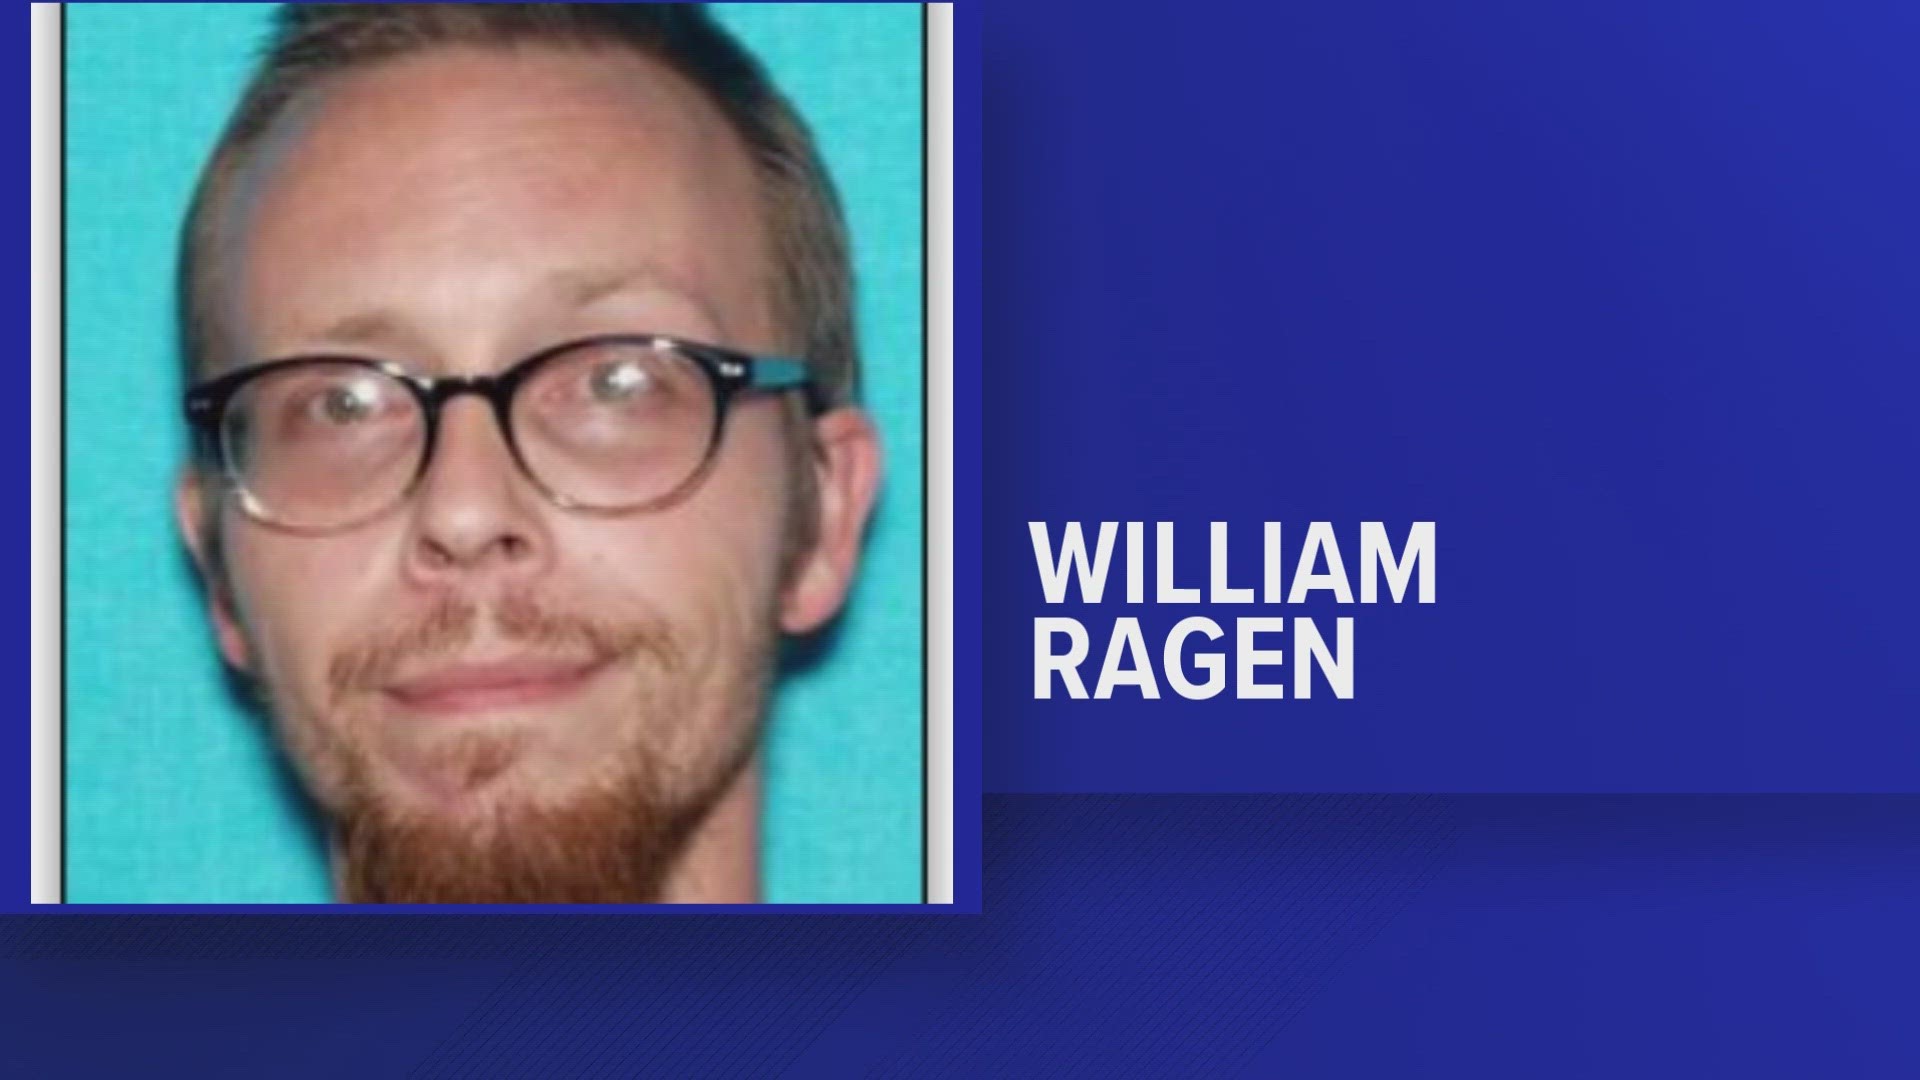 Officials said William Ragen broke into a home in Laurel County and then ran from deputies. He is now charged with first-degree burglary.